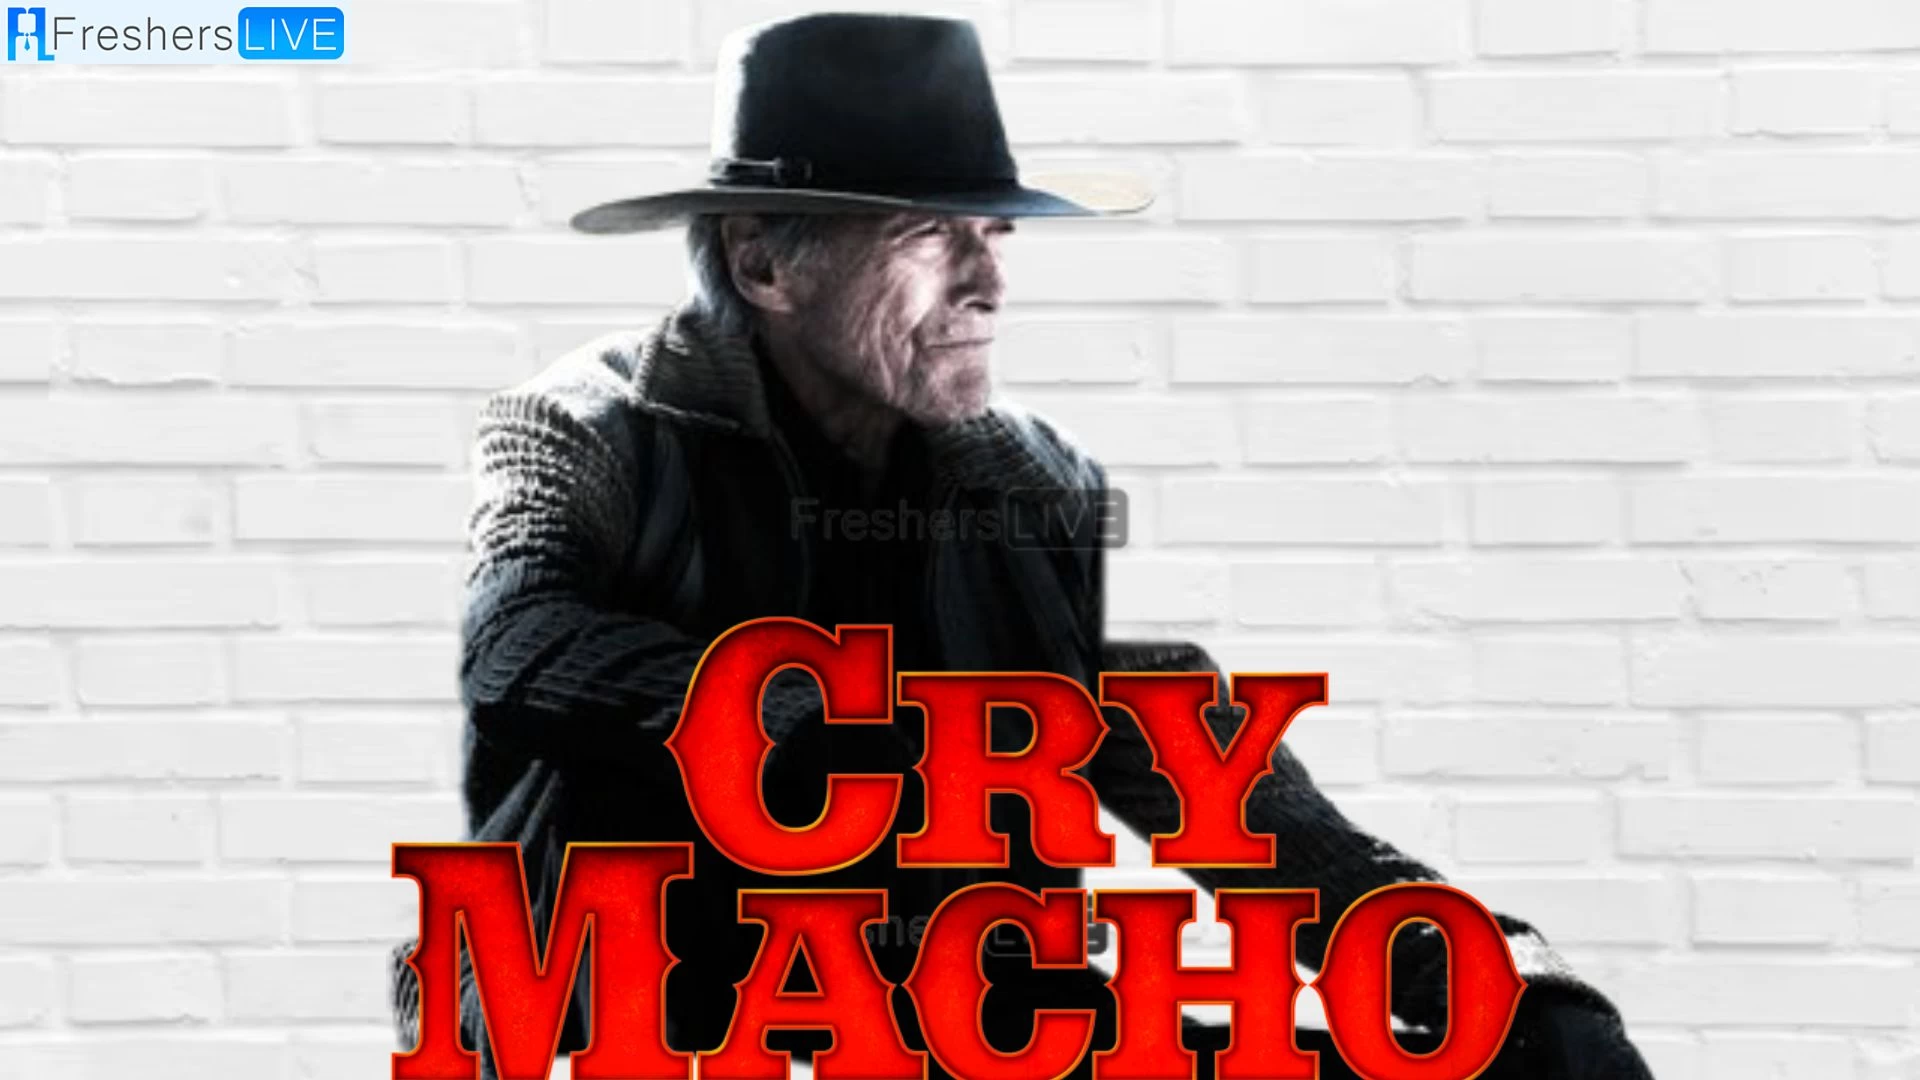 Is Clint Eastwood's Cry Macho Based on a True Story? Clint Eastwood's Cry Macho Cast, Plot, and More